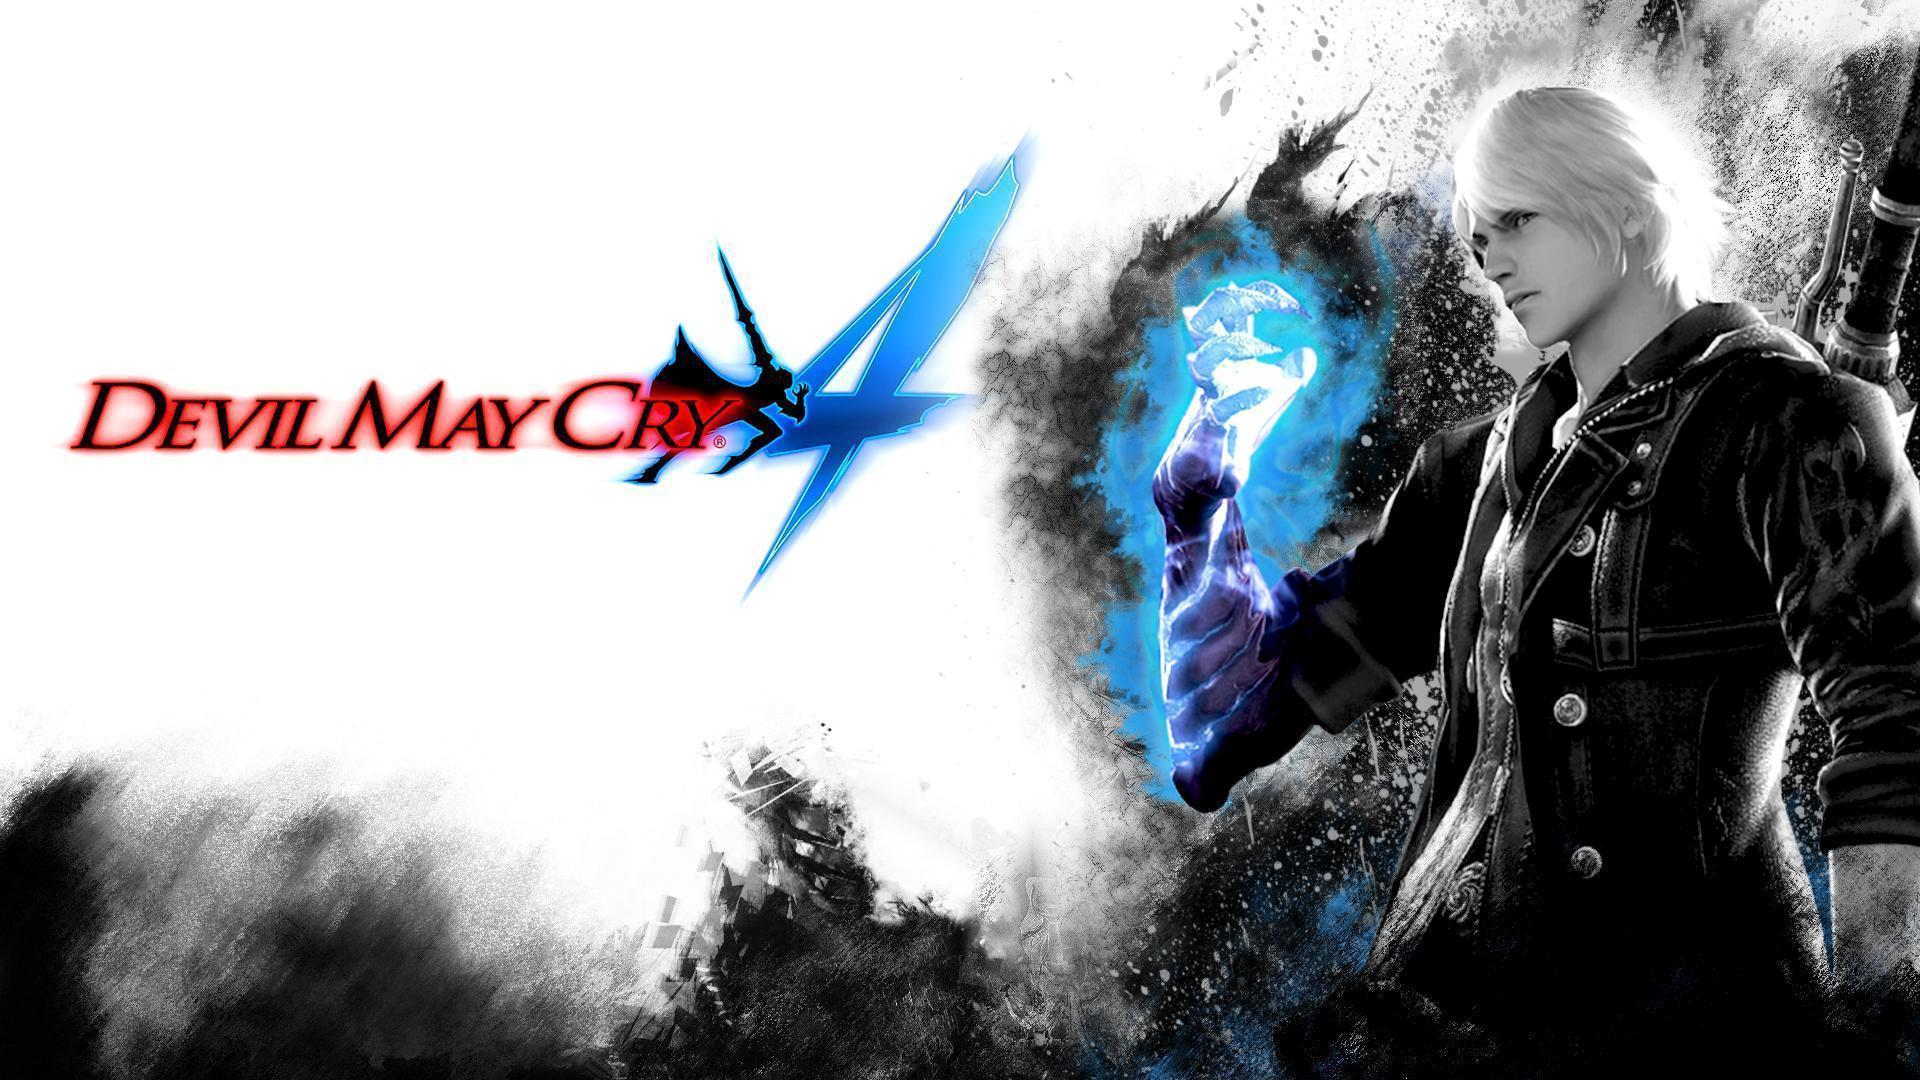 DmC: Devil May Cry Wallpaper. DmC: Devil May Cry Background